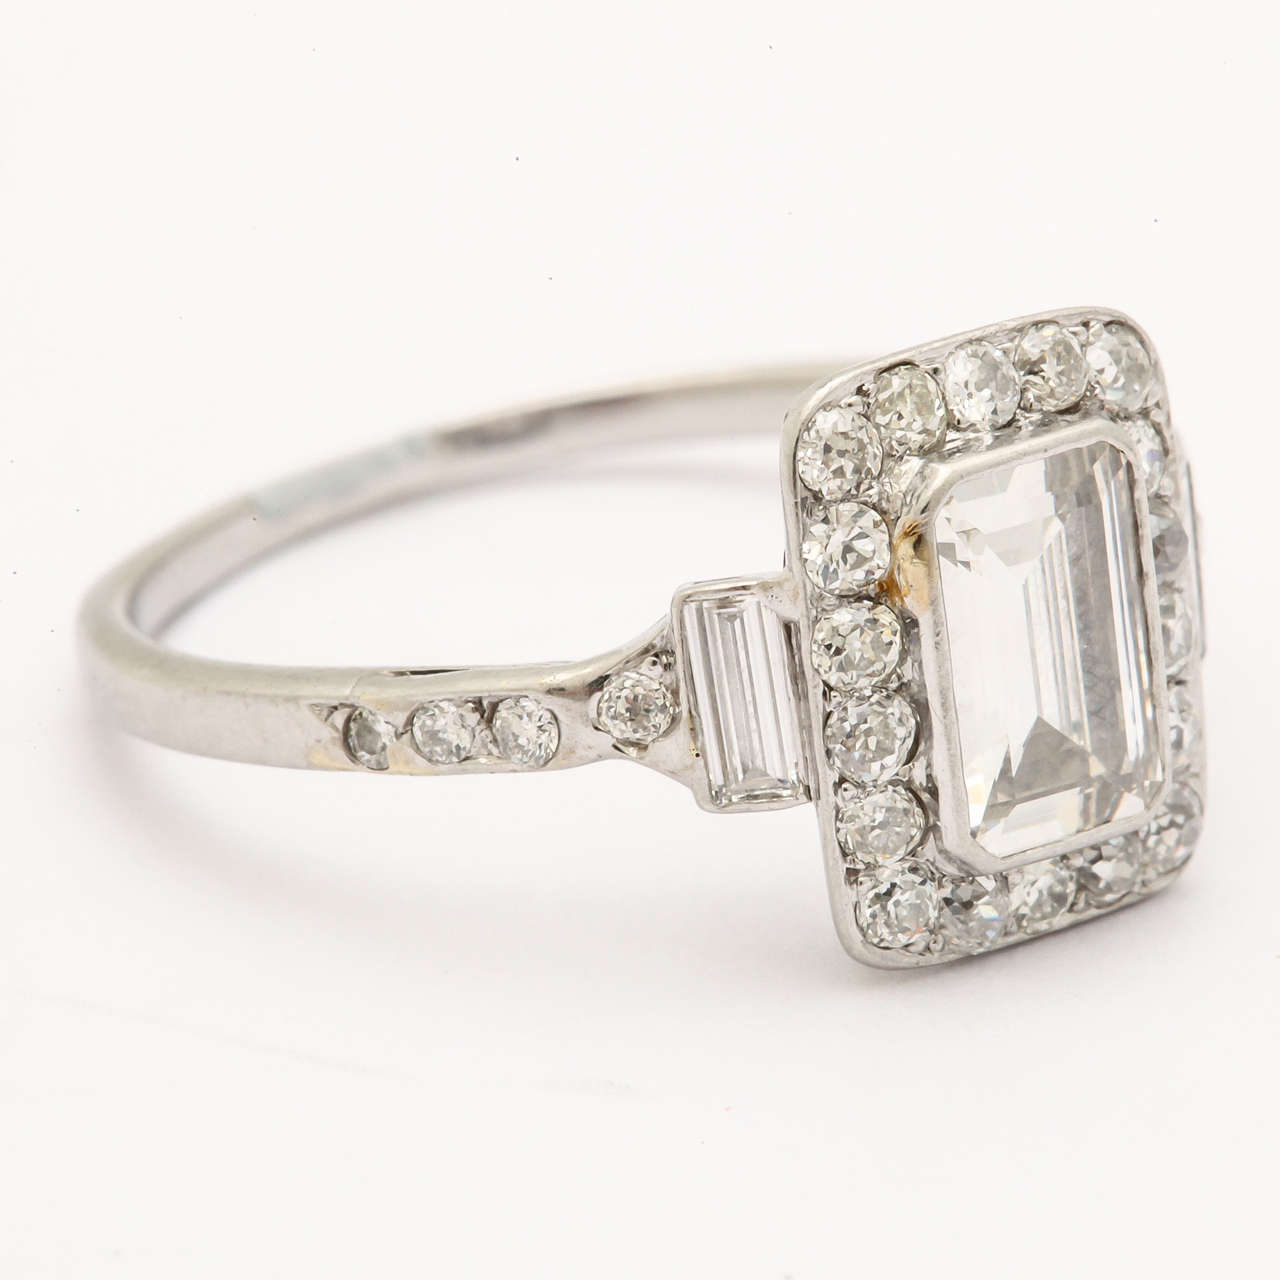 This piece has a 1.15 ct elongated emerald cut diamond surrounded by 18 round diamond and 2 baguettes on either side weighing approximately .38 ct. The diamond is an excellent quality; F color, VS 1. Interesting and beautiful as an engagement ring.